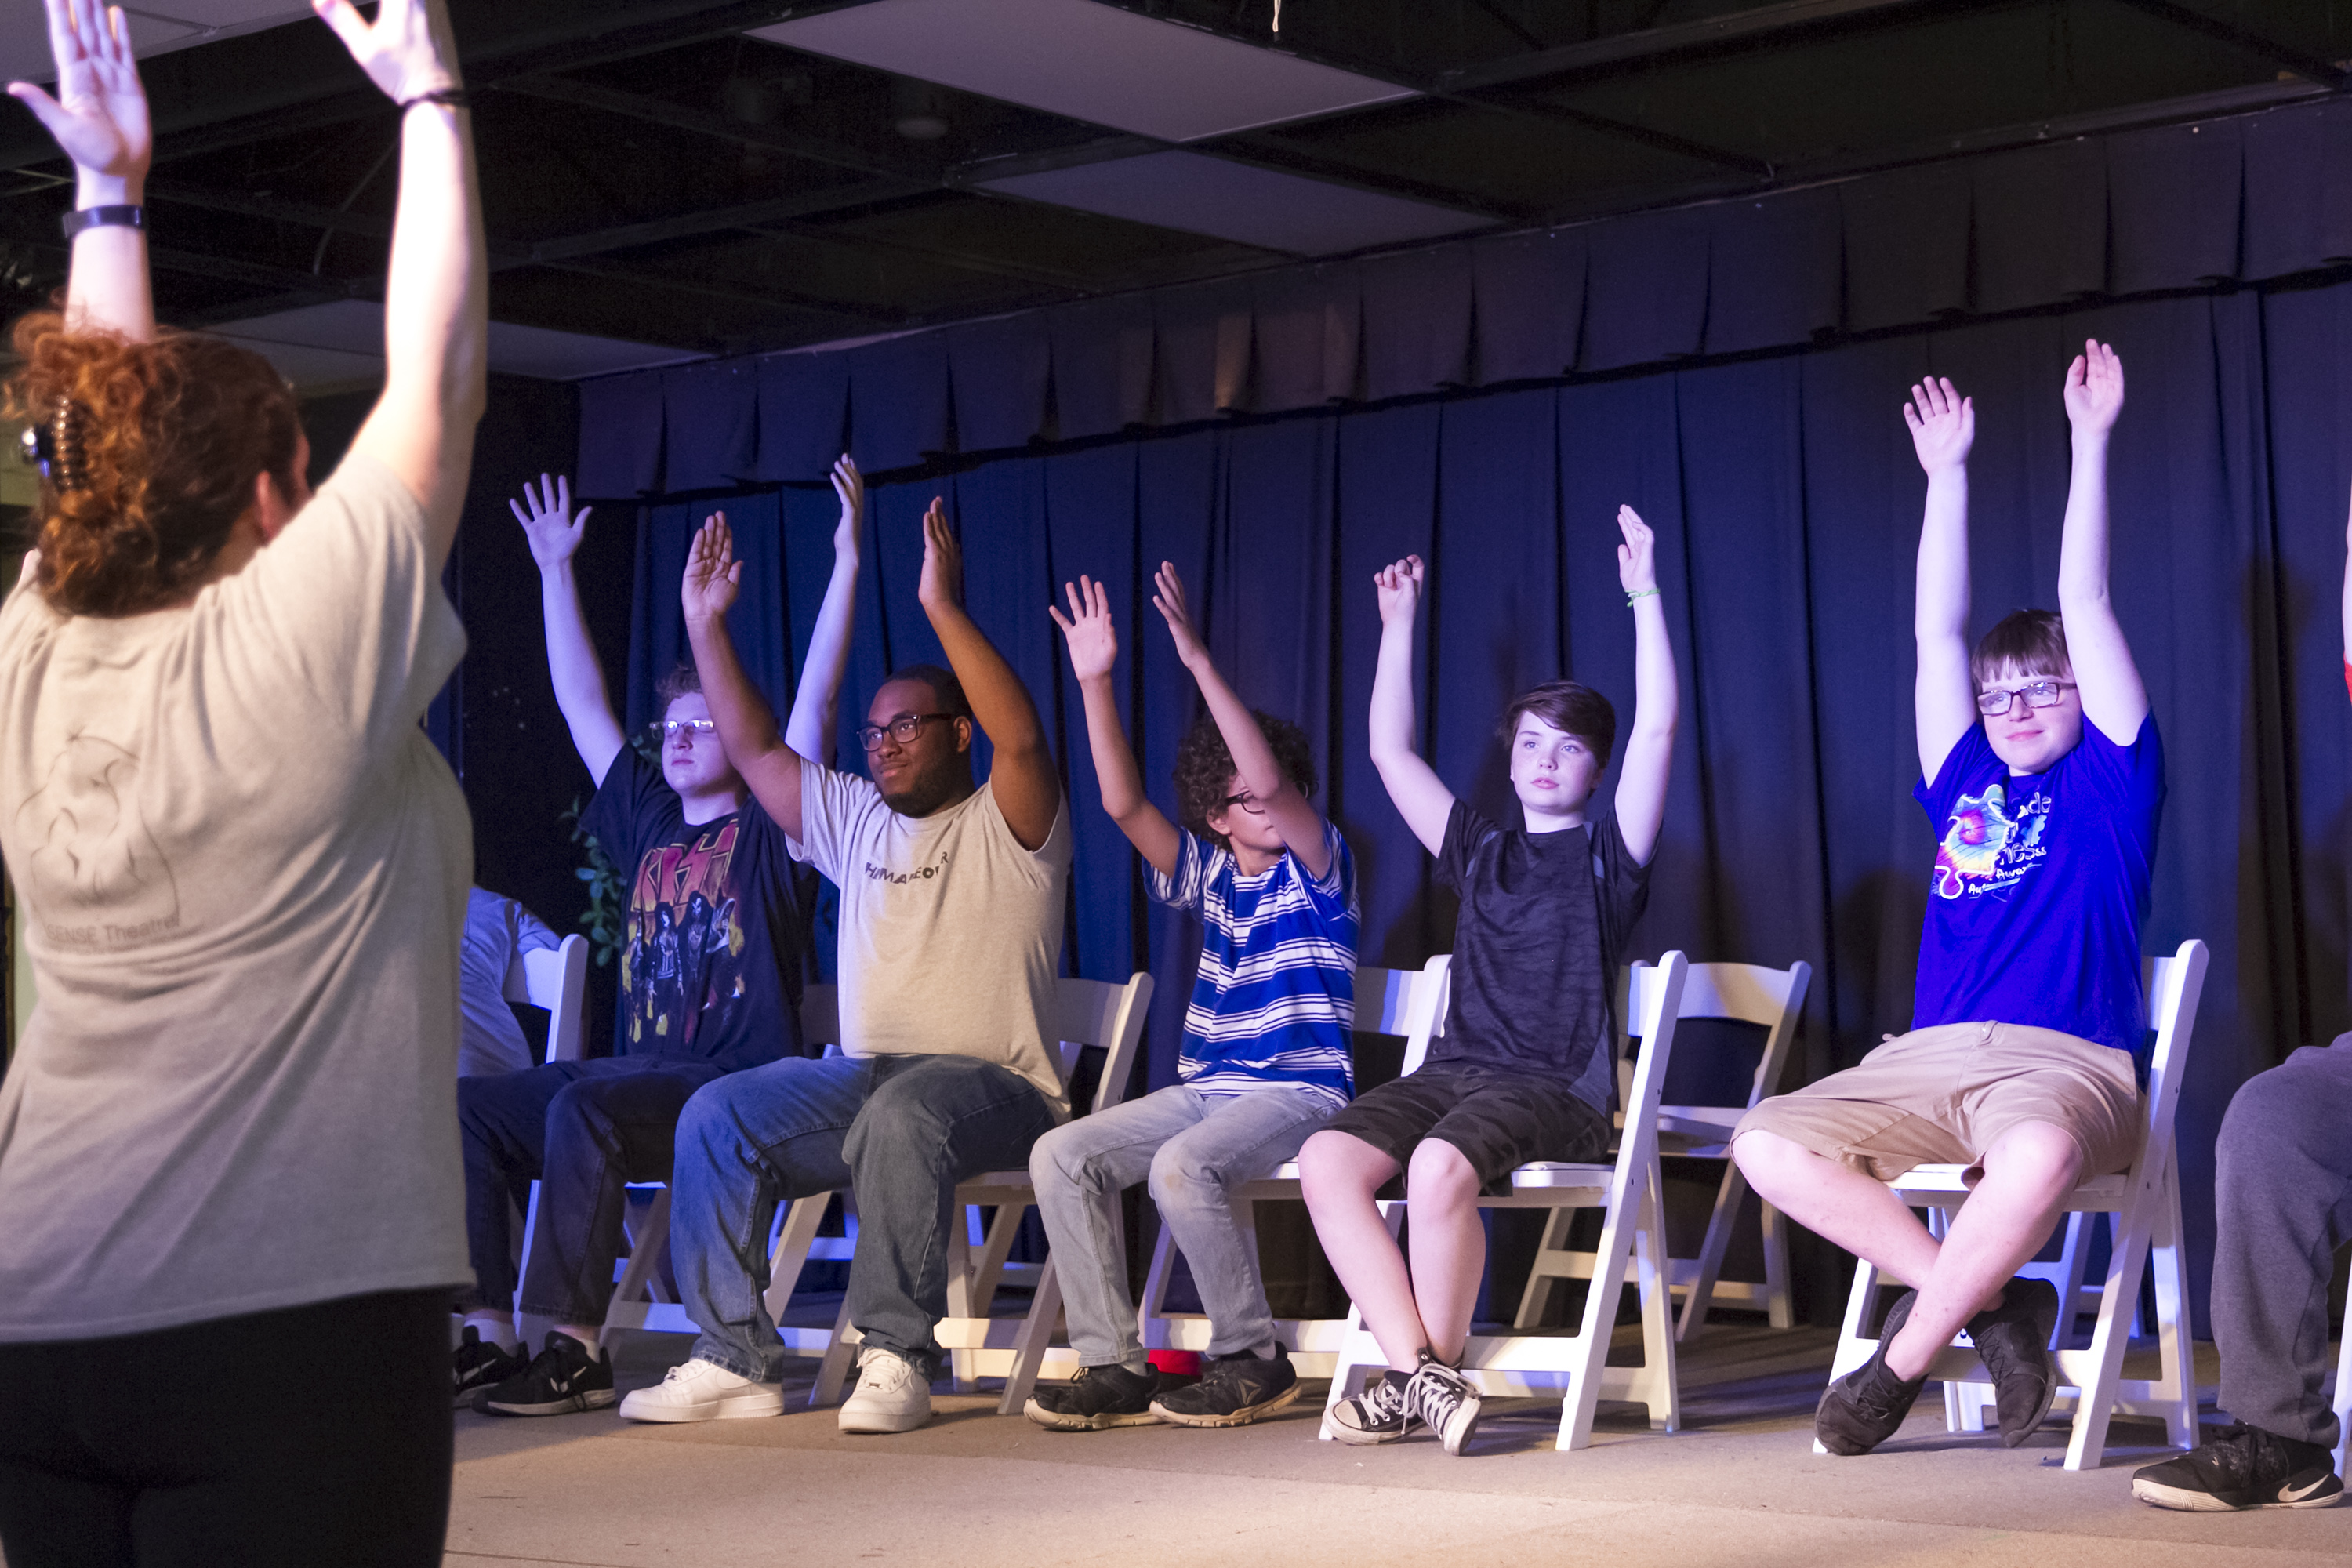 Theatre actors ages 10 to 17 hold their arms in the air as they rehearse a play.